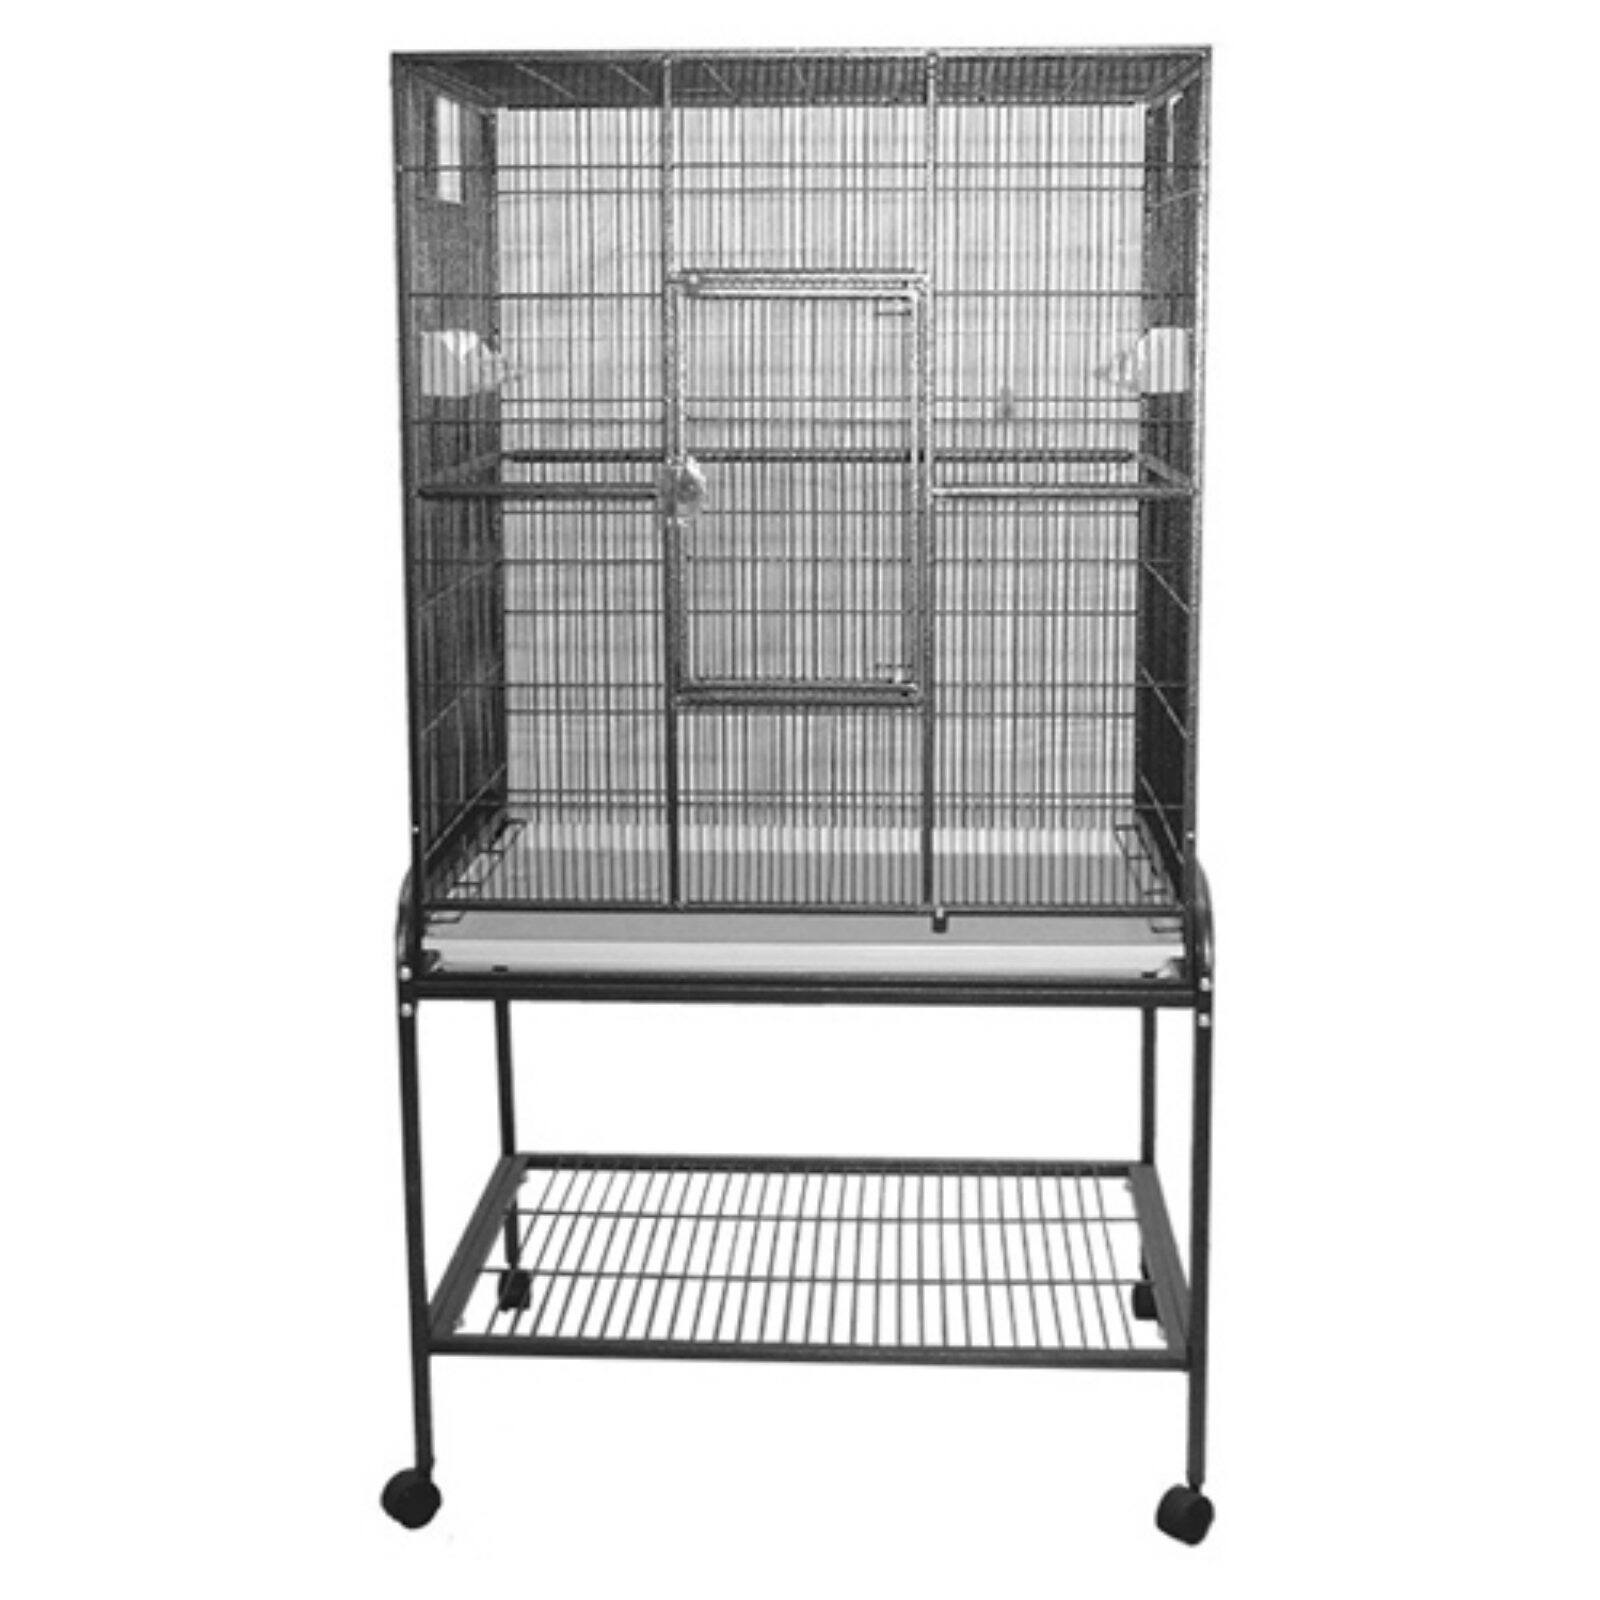 A and E Cage Co. Wrought Iron Flight Cage-Platinum - image 3 of 4